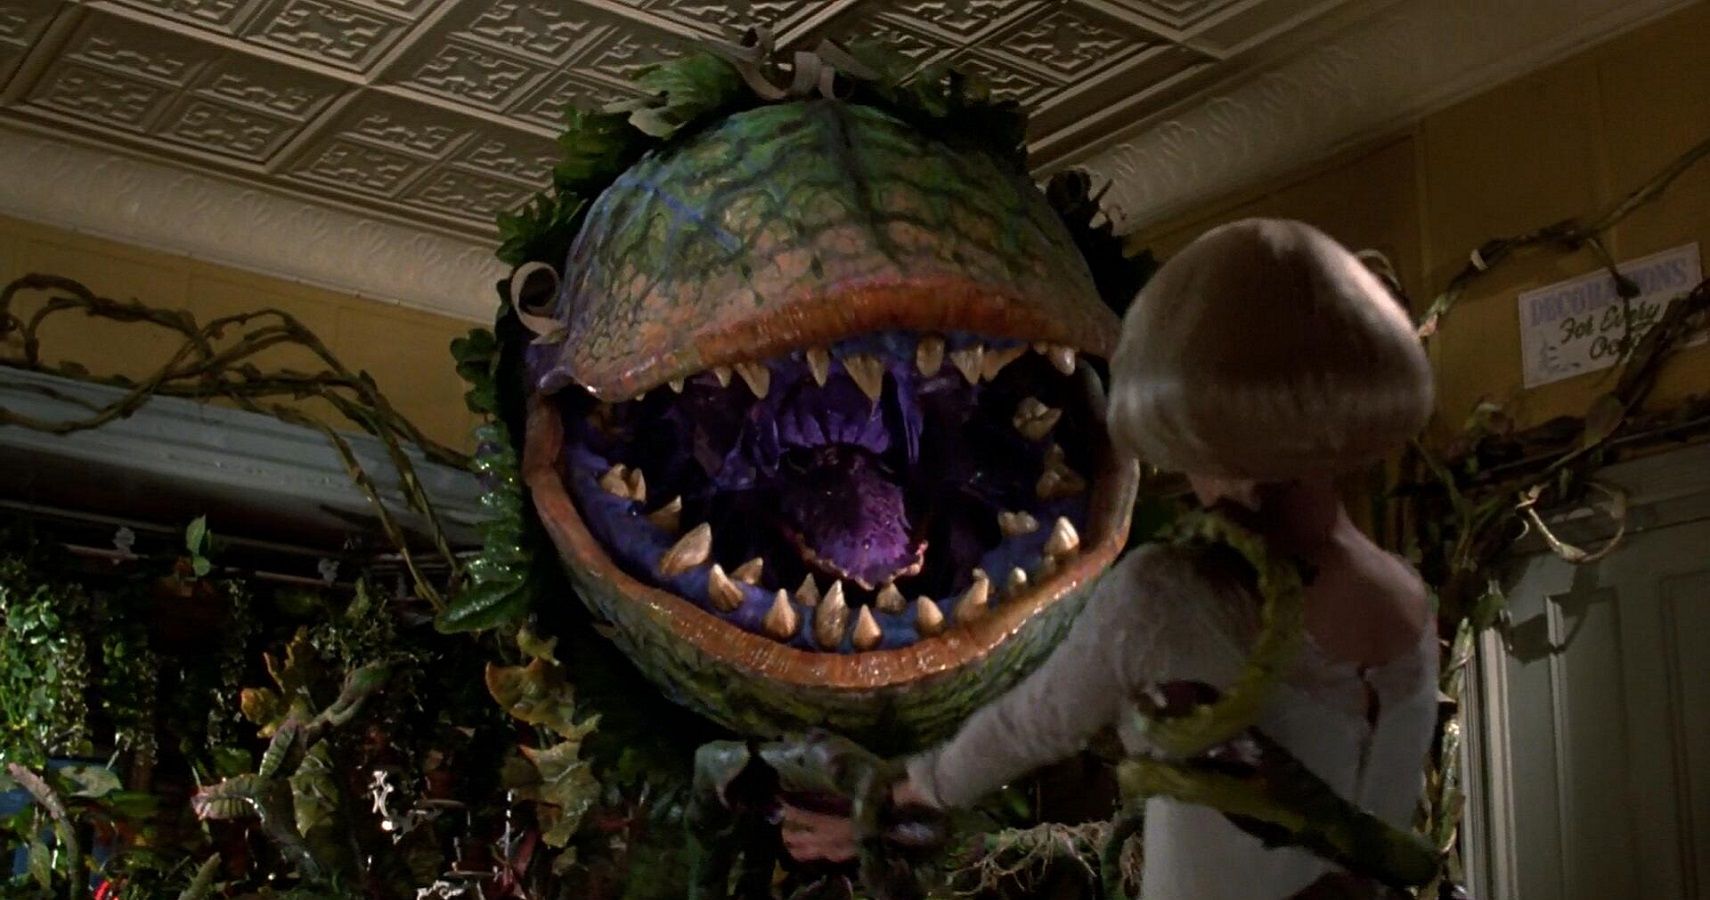 10 Behind-The-Scenes About The Making Of Little Shop Of Horrors